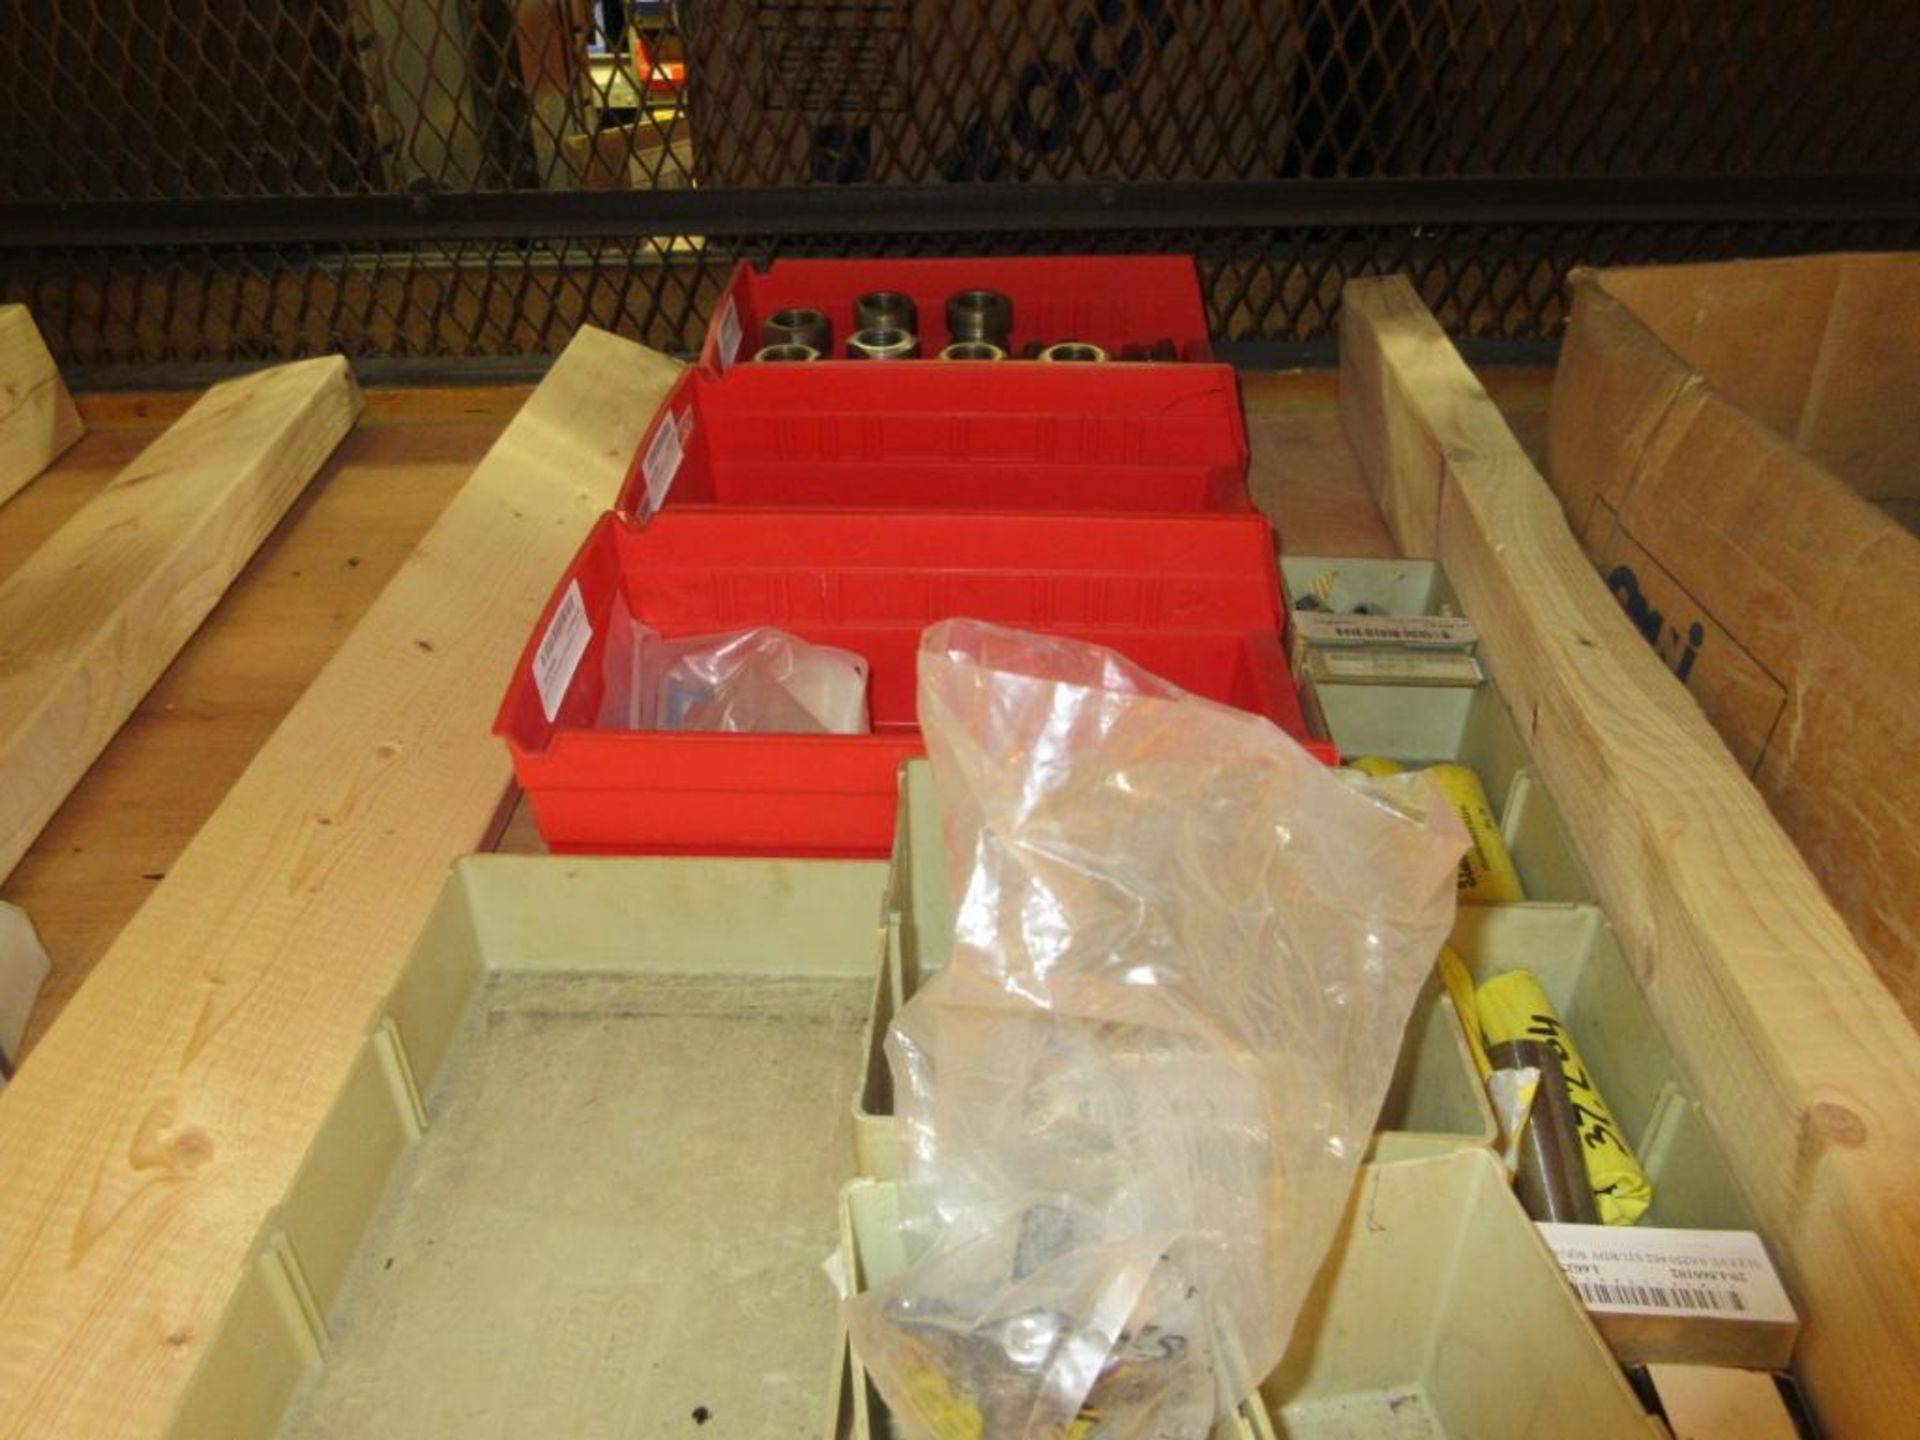 CONTENTS OF (22) SECTIONS PALLET RACK: ASSORTED ABRASIVES, SUNNEN STONES, TOOL BITS, DOVETAIL CUTTER - Image 18 of 43